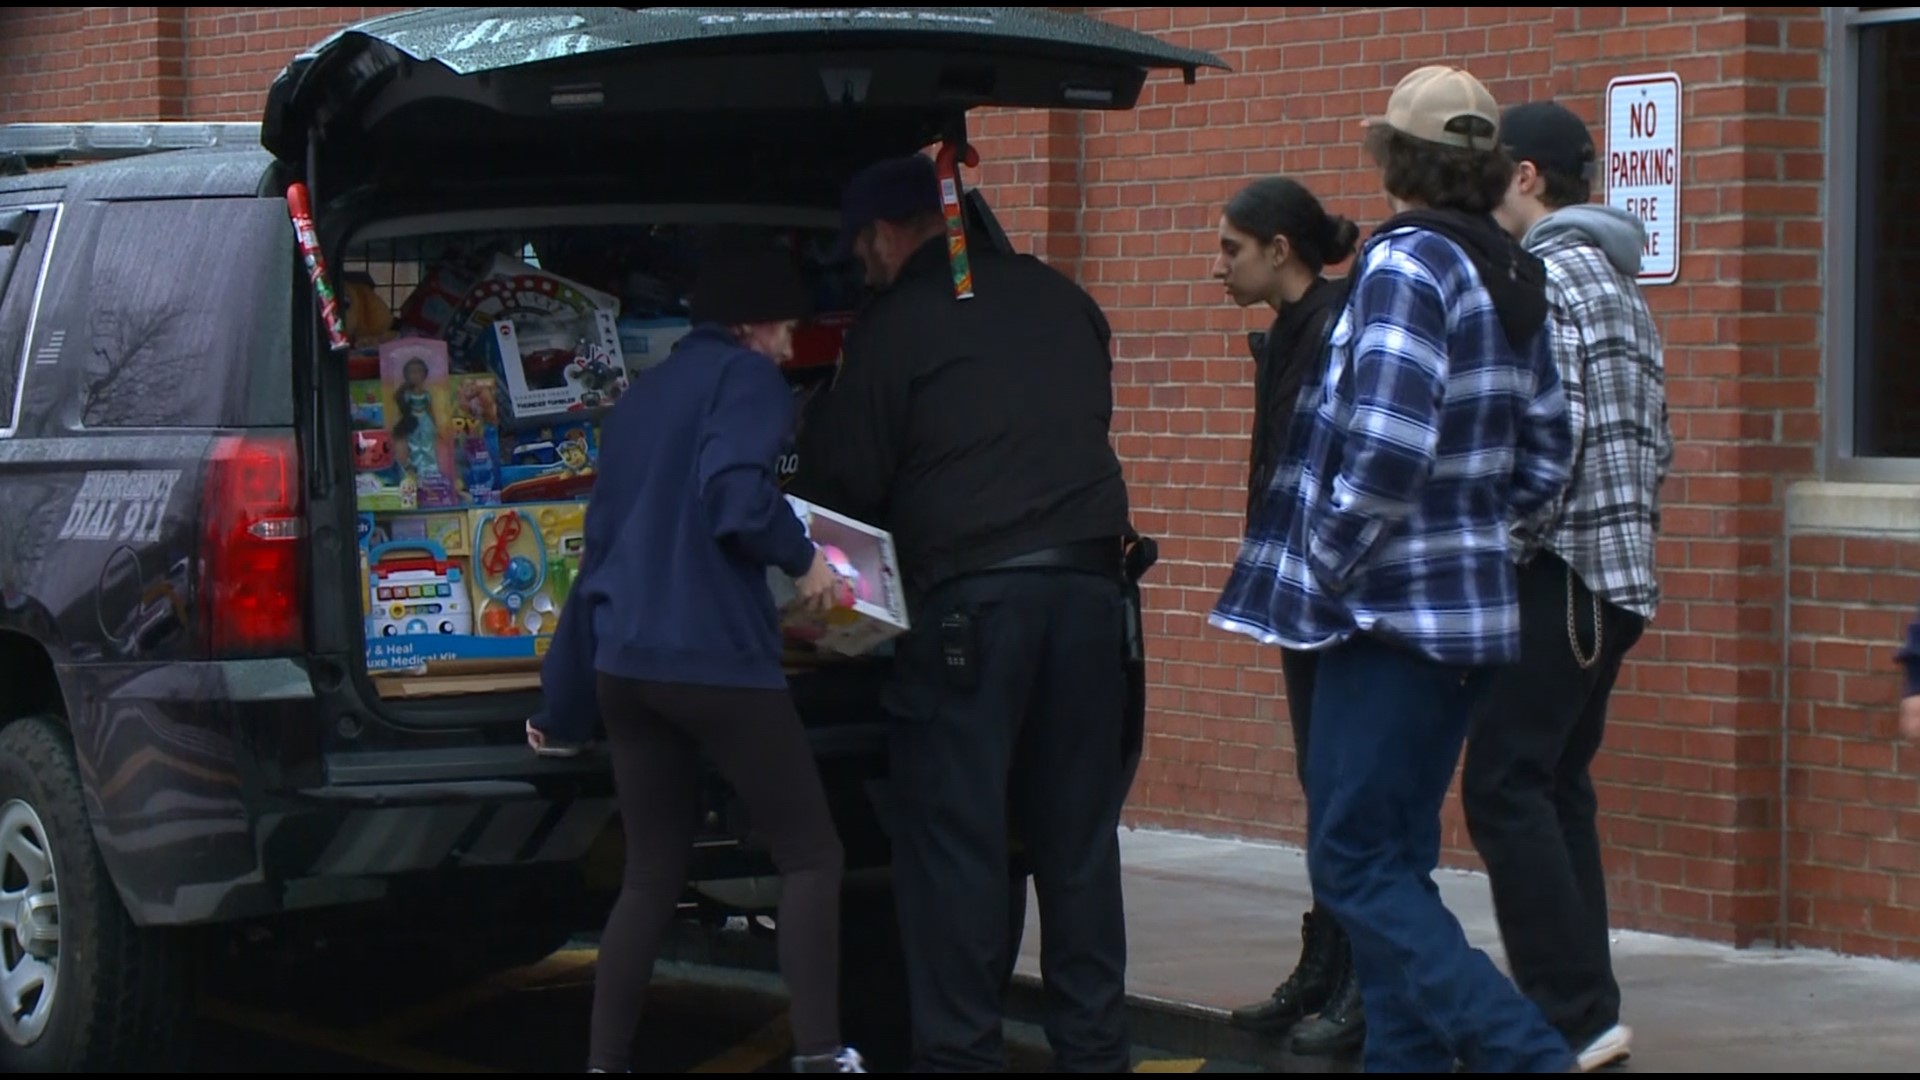 In Avon, police and fire joined forces outside Walmart Friday in the hopes of hooking Black Friday shoppers.